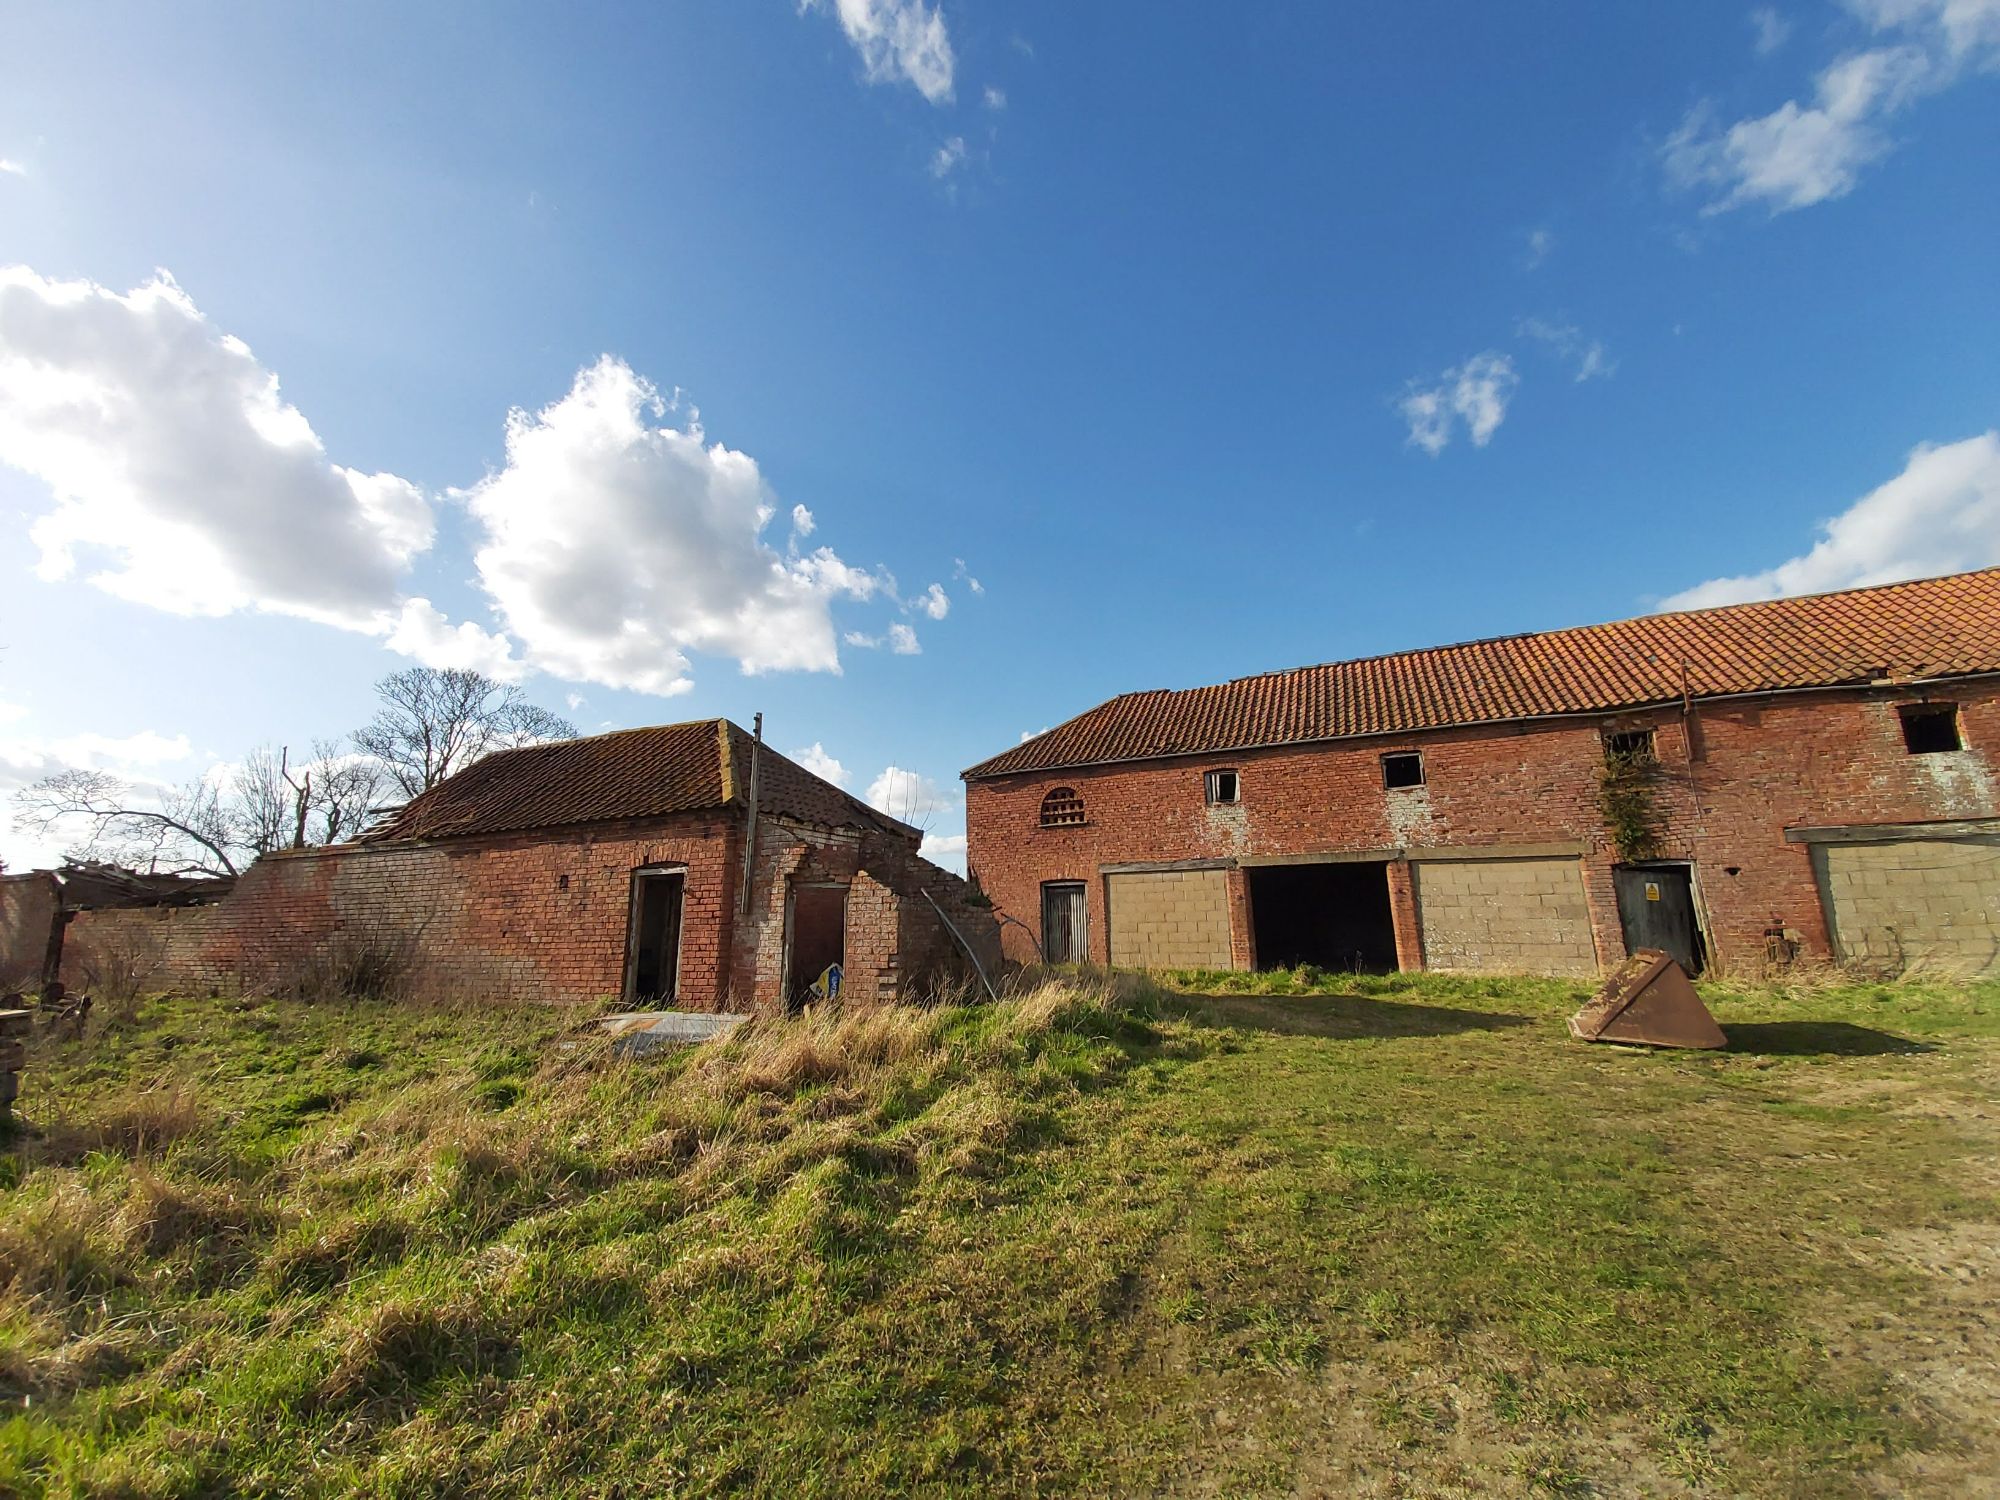 Plans submitted for barn conversions in West Rasen Lincolnshire